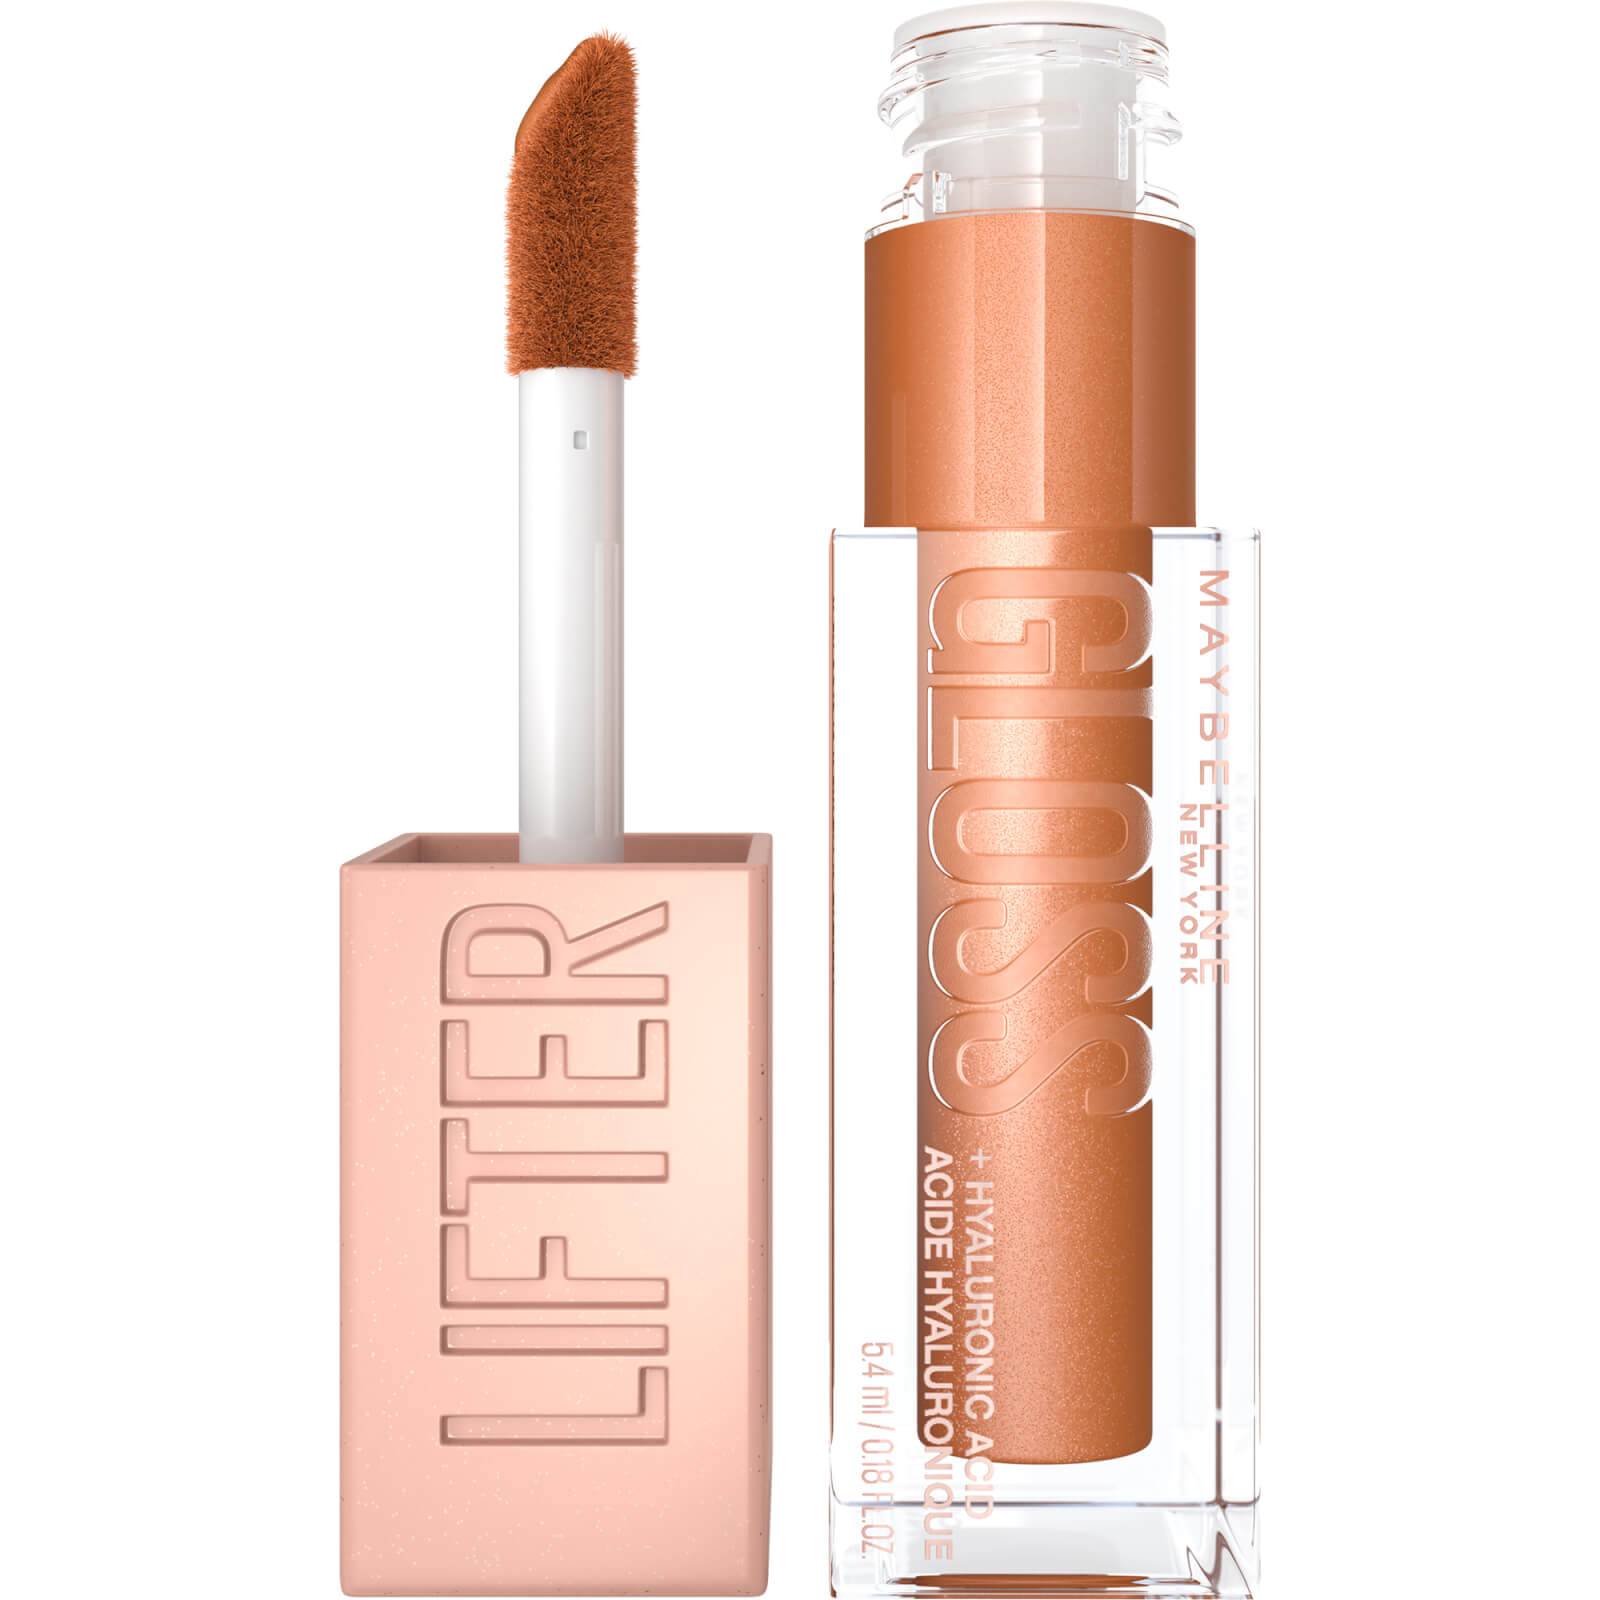 Photos - Lipstick & Lip Gloss Maybelline Lifter Gloss Hydrating Lip Gloss with Hyaluronic Acid 5g (Vario 